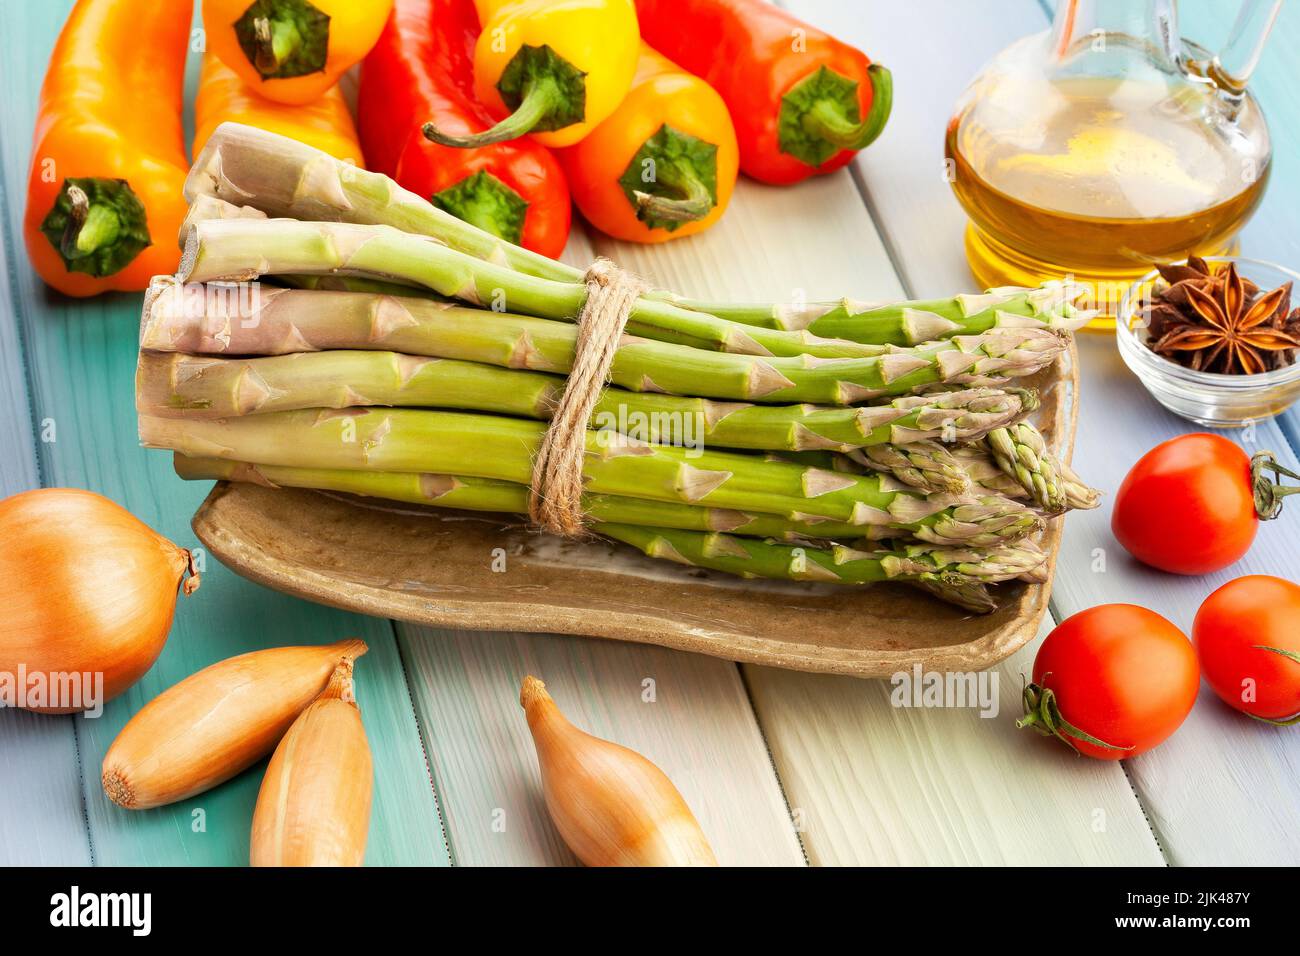 asparagus bunch on wood background Stock Photo